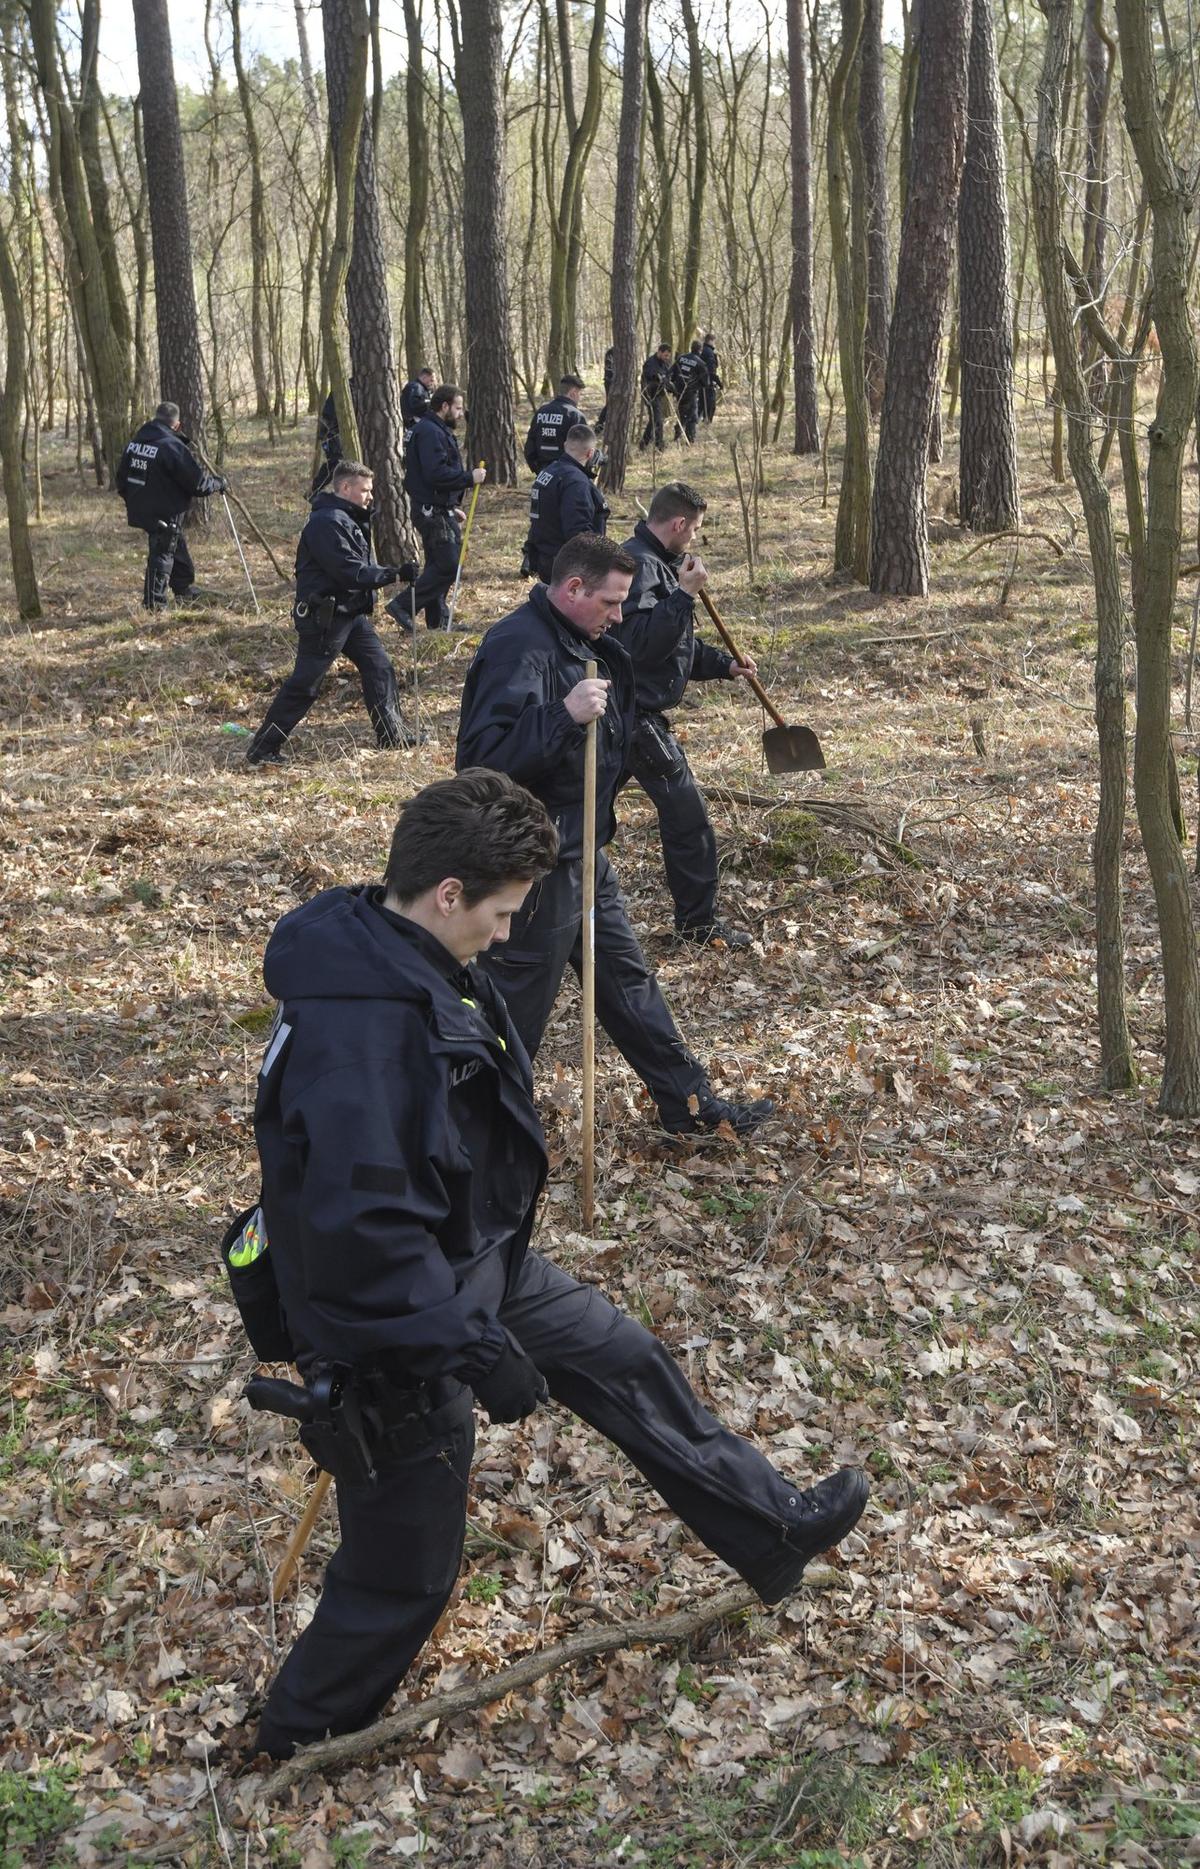 Berlin police search a forest in Kummersdorf, Germany. Hundreds of police officers are searching for a girl who went missing in Berlin last month, in a case that has distressed the country. German news agency dpa reported that 100 officers were sifting through a forest 18 miles southeast of the capital on March 8, 2019. (Patrick Pleul/dpa via AP)